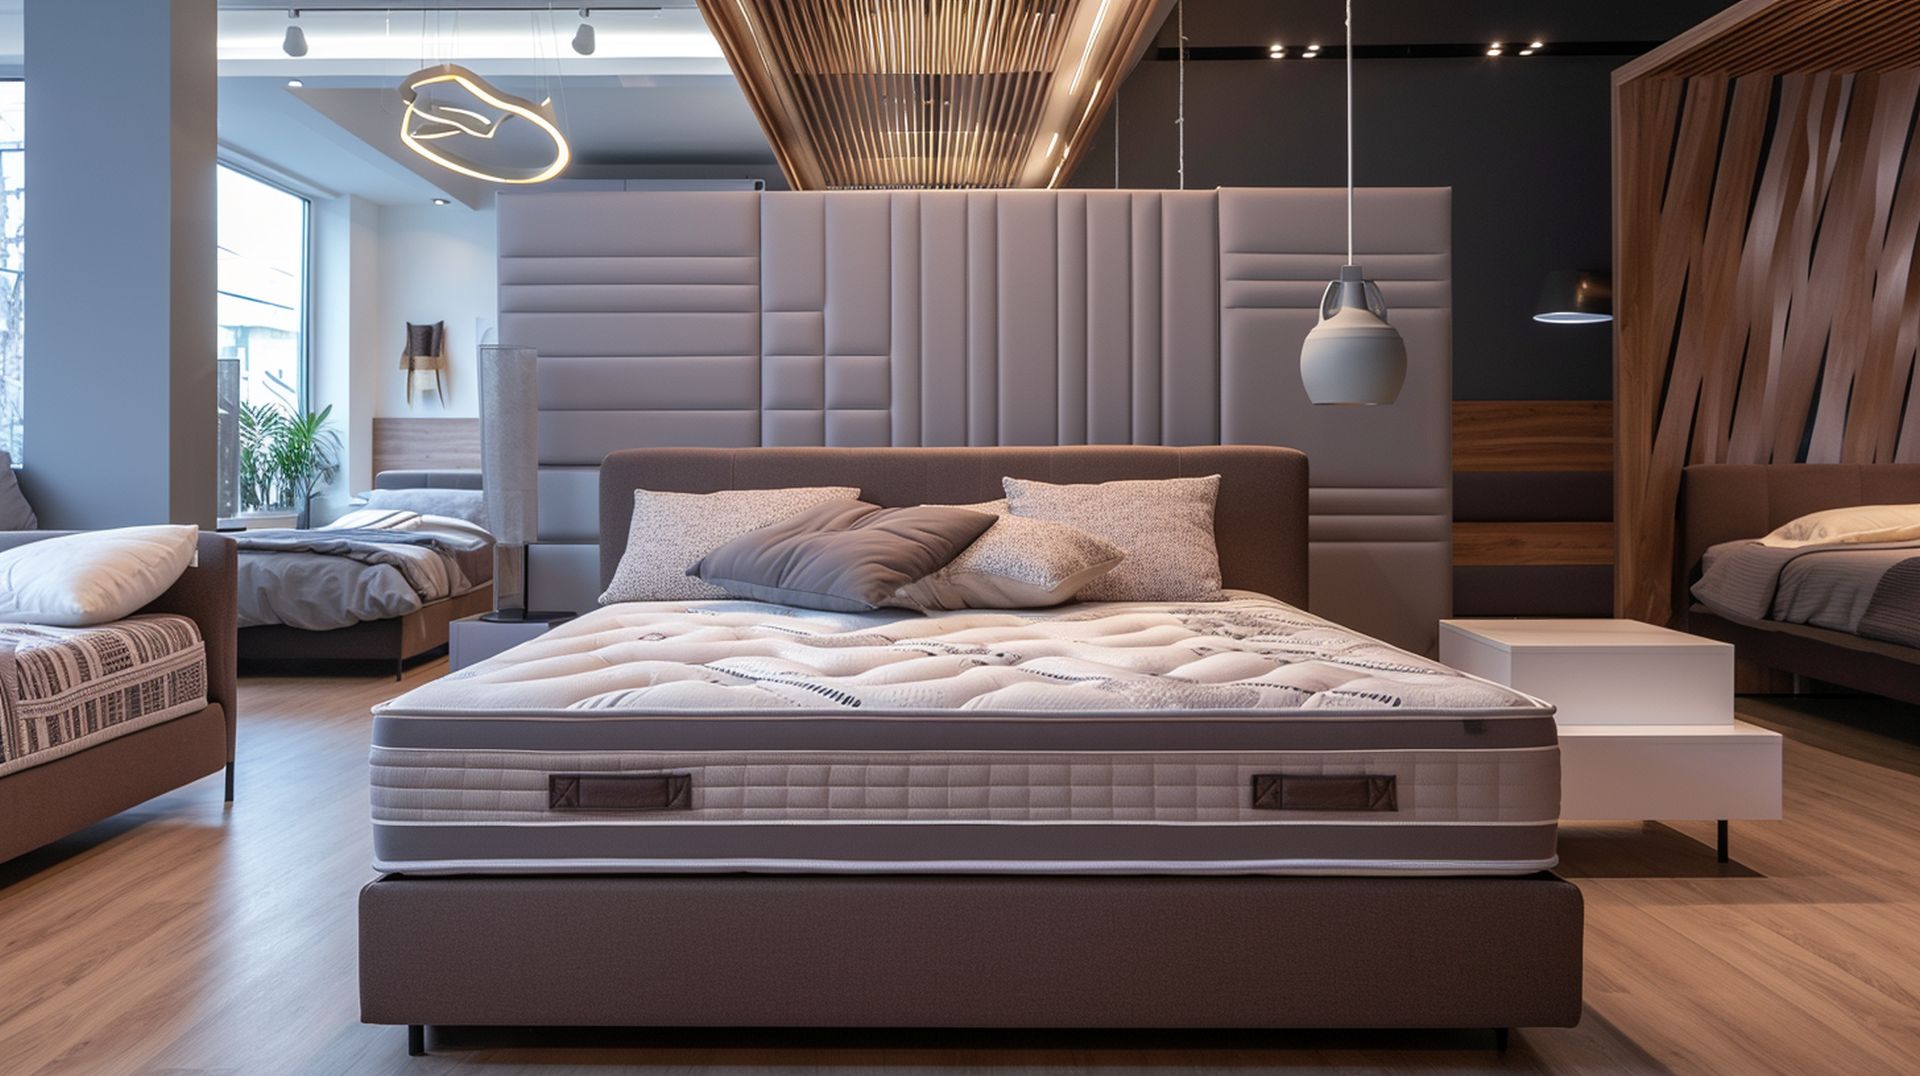 If you're looking for a new bed, mattress stores in Albuquerque offer the best customer and delivery service, financing, and warranties in New Mexico